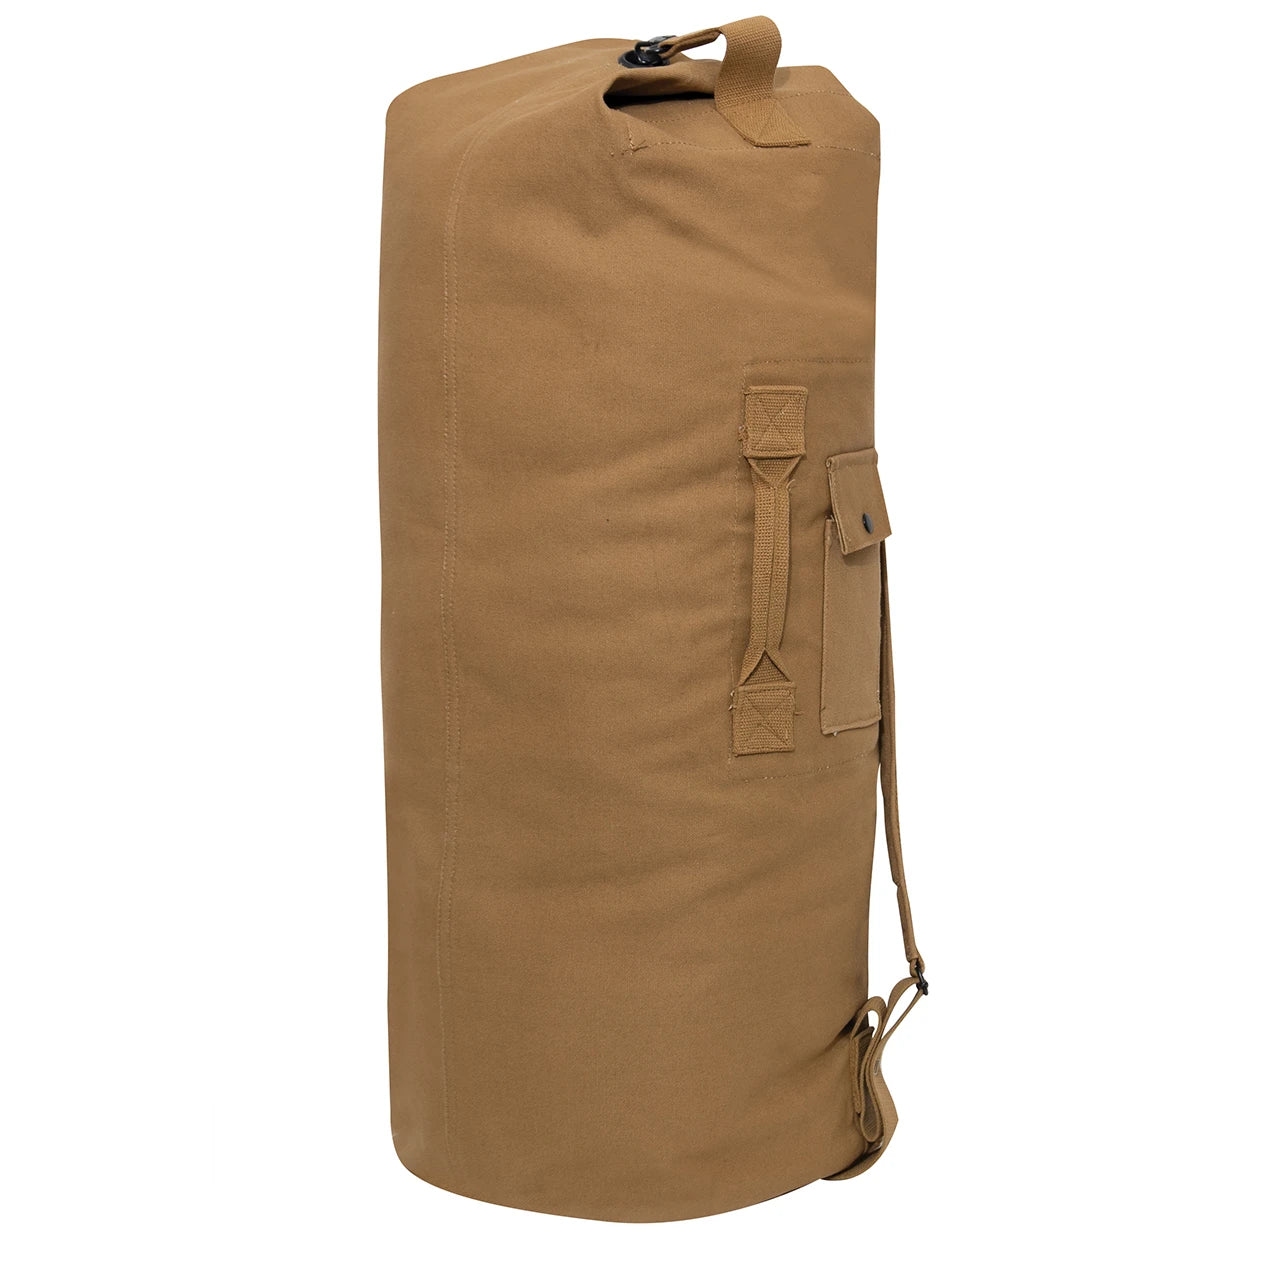 G.I. Style Canvas Double Strap Duffle Bag - 22" x 38"